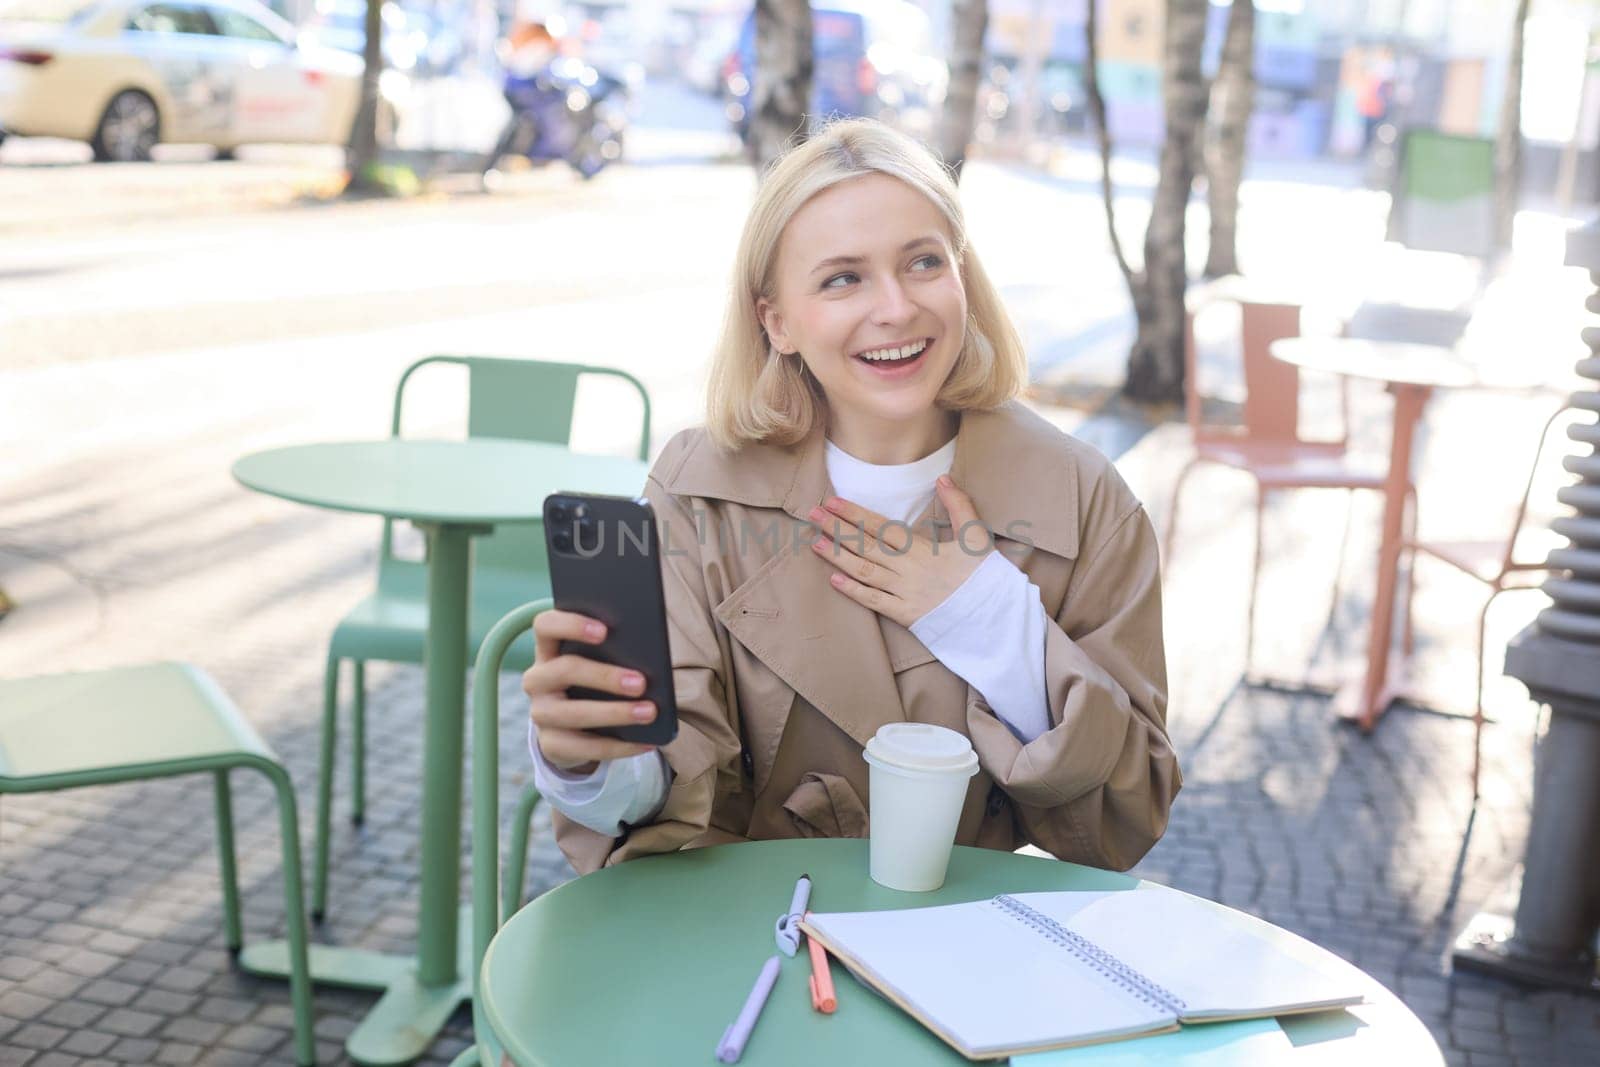 Portrait of young stylish woman in trench, sitting outdoors in city cafe, talking on video chat, using mobile phone to connect to online conversation, drinking coffee.